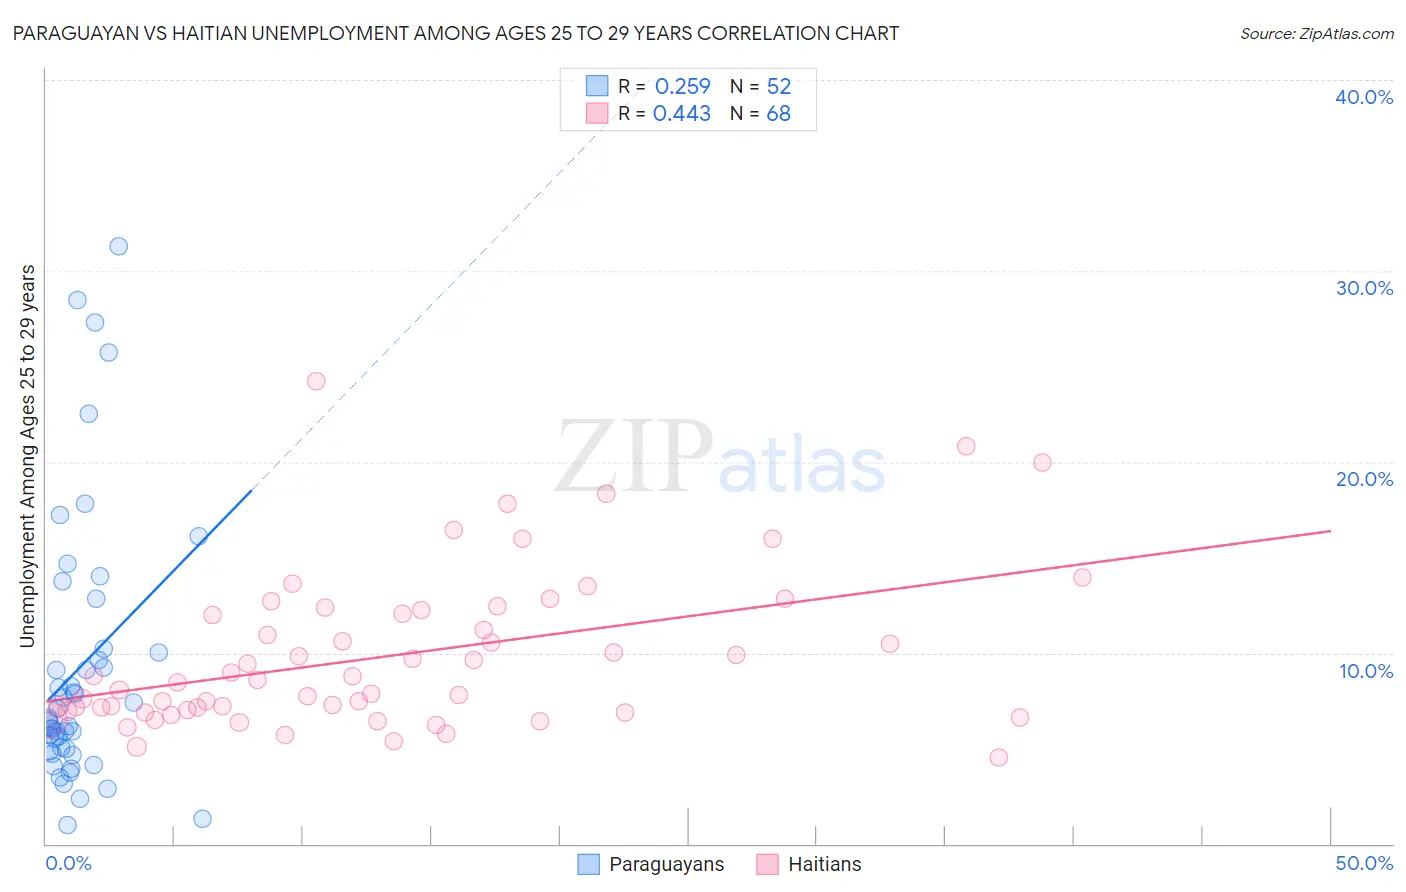 Paraguayan vs Haitian Unemployment Among Ages 25 to 29 years